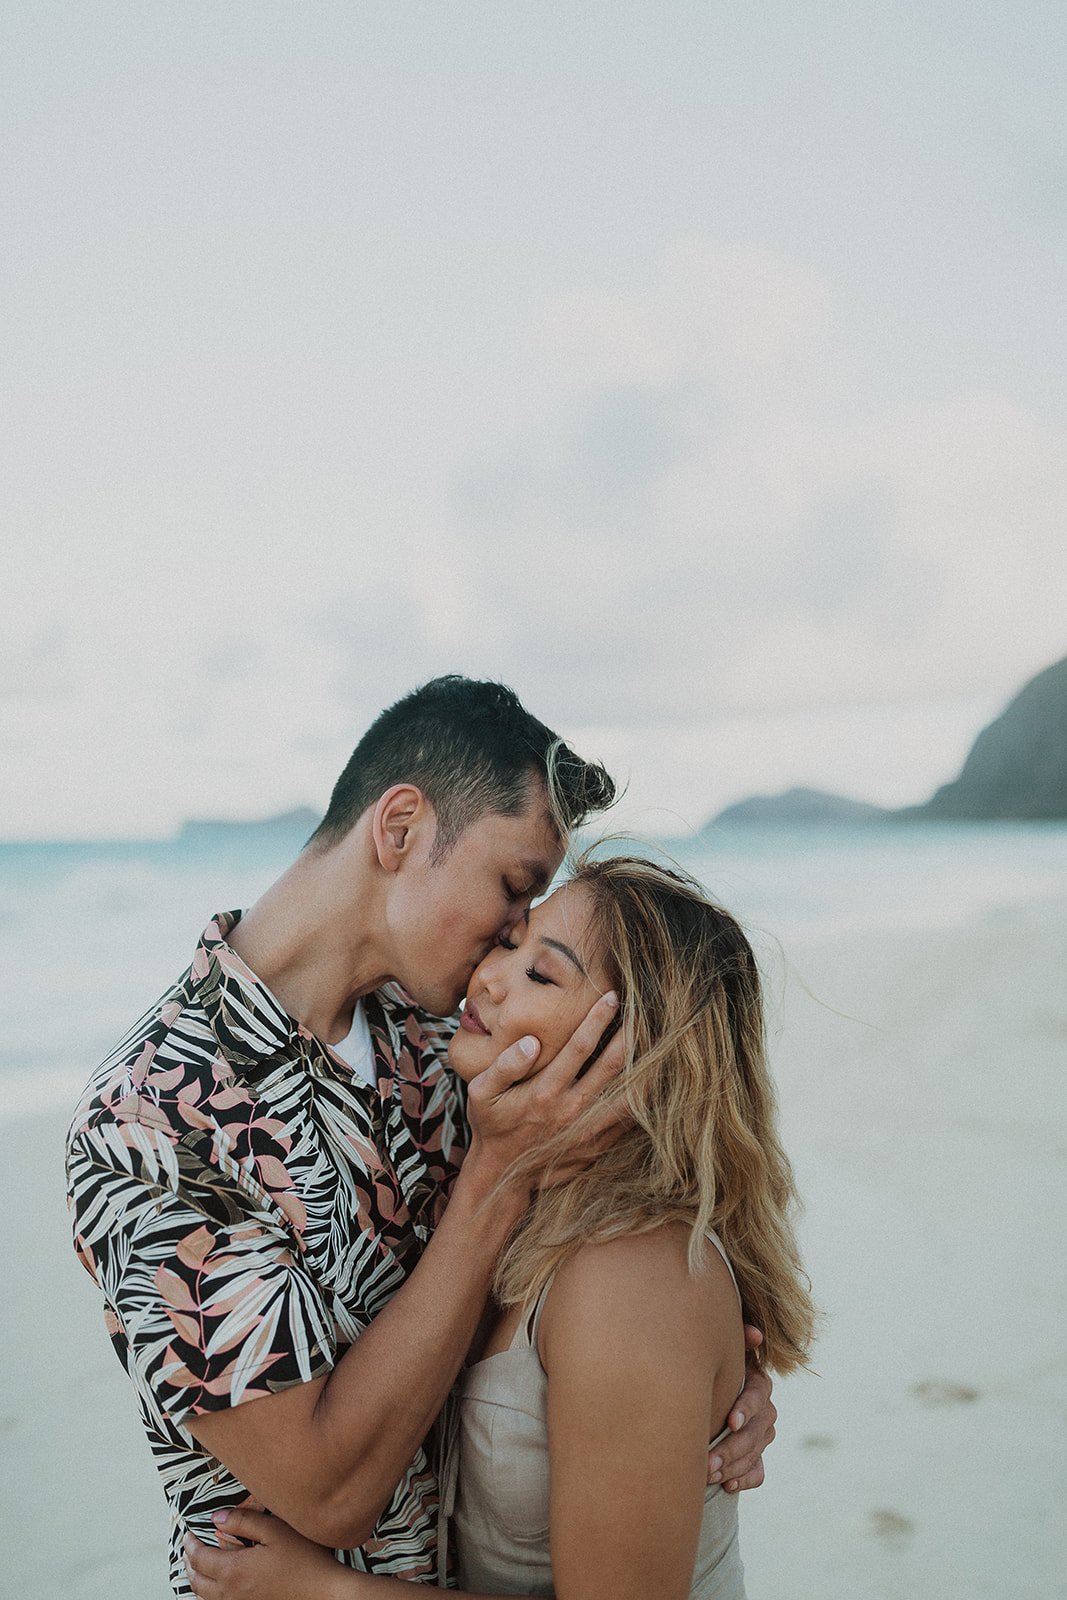 Couple romantic pose at the beach Stock Photos - Page 1 : Masterfile